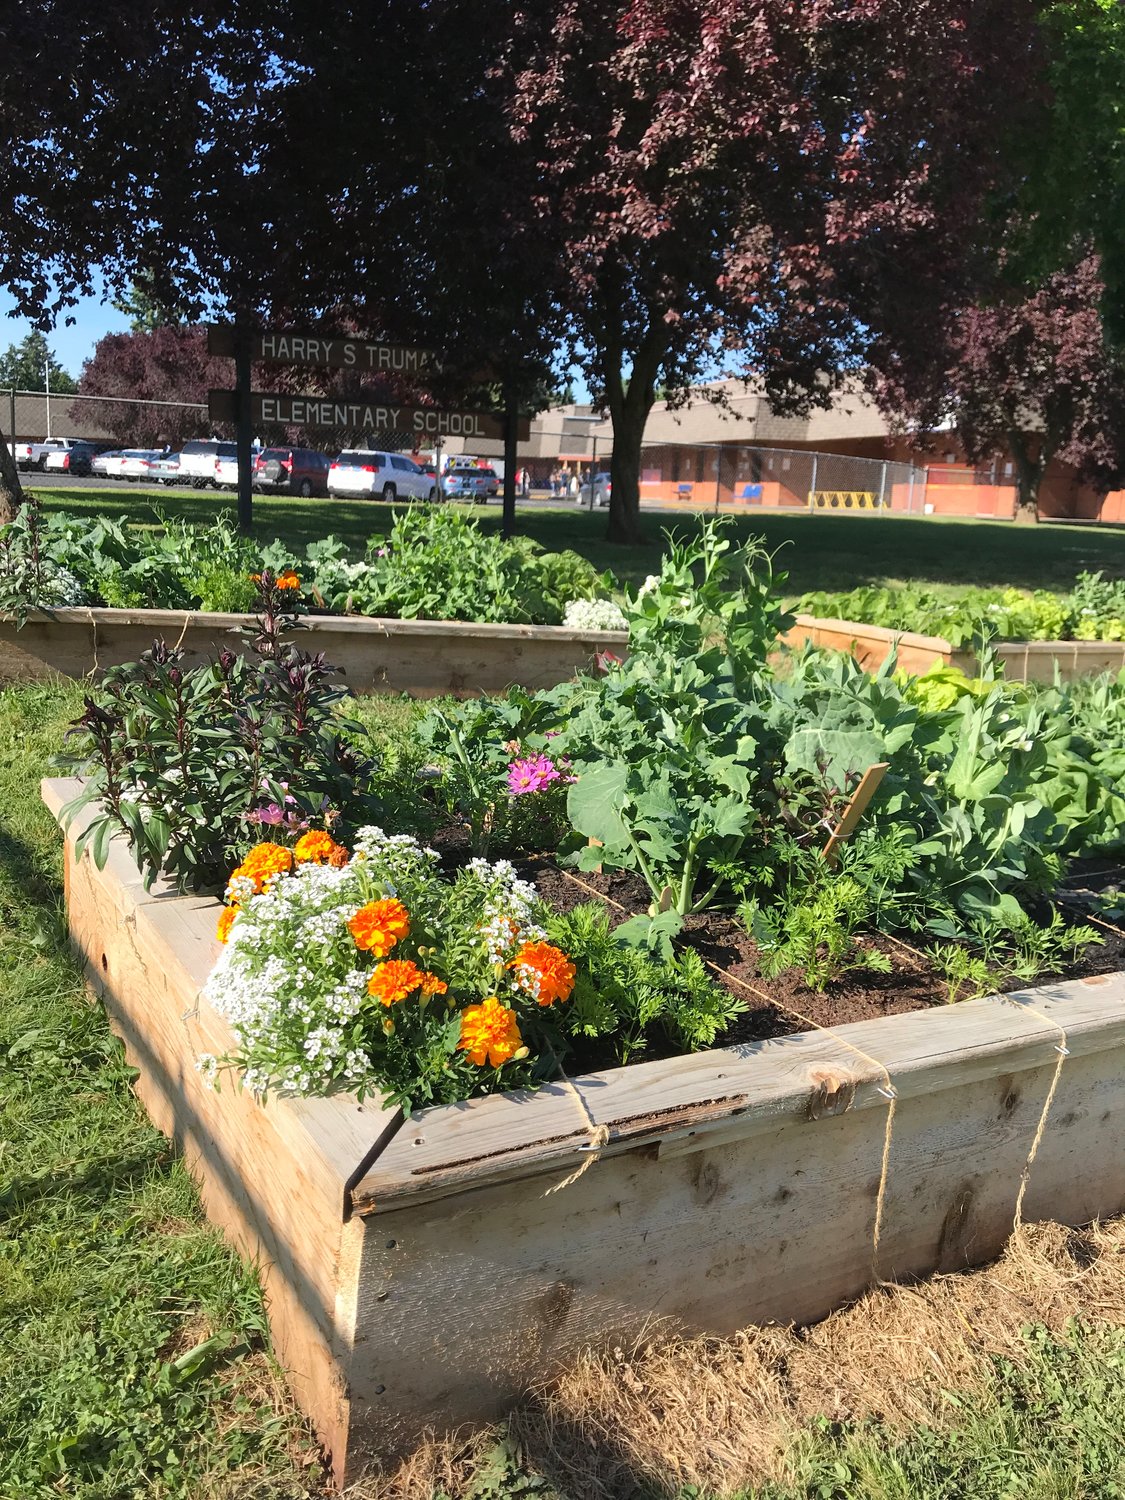 Students at Harry S. Truman Elementary School in Vancouver planted a “school garden” a couple seasons ago.